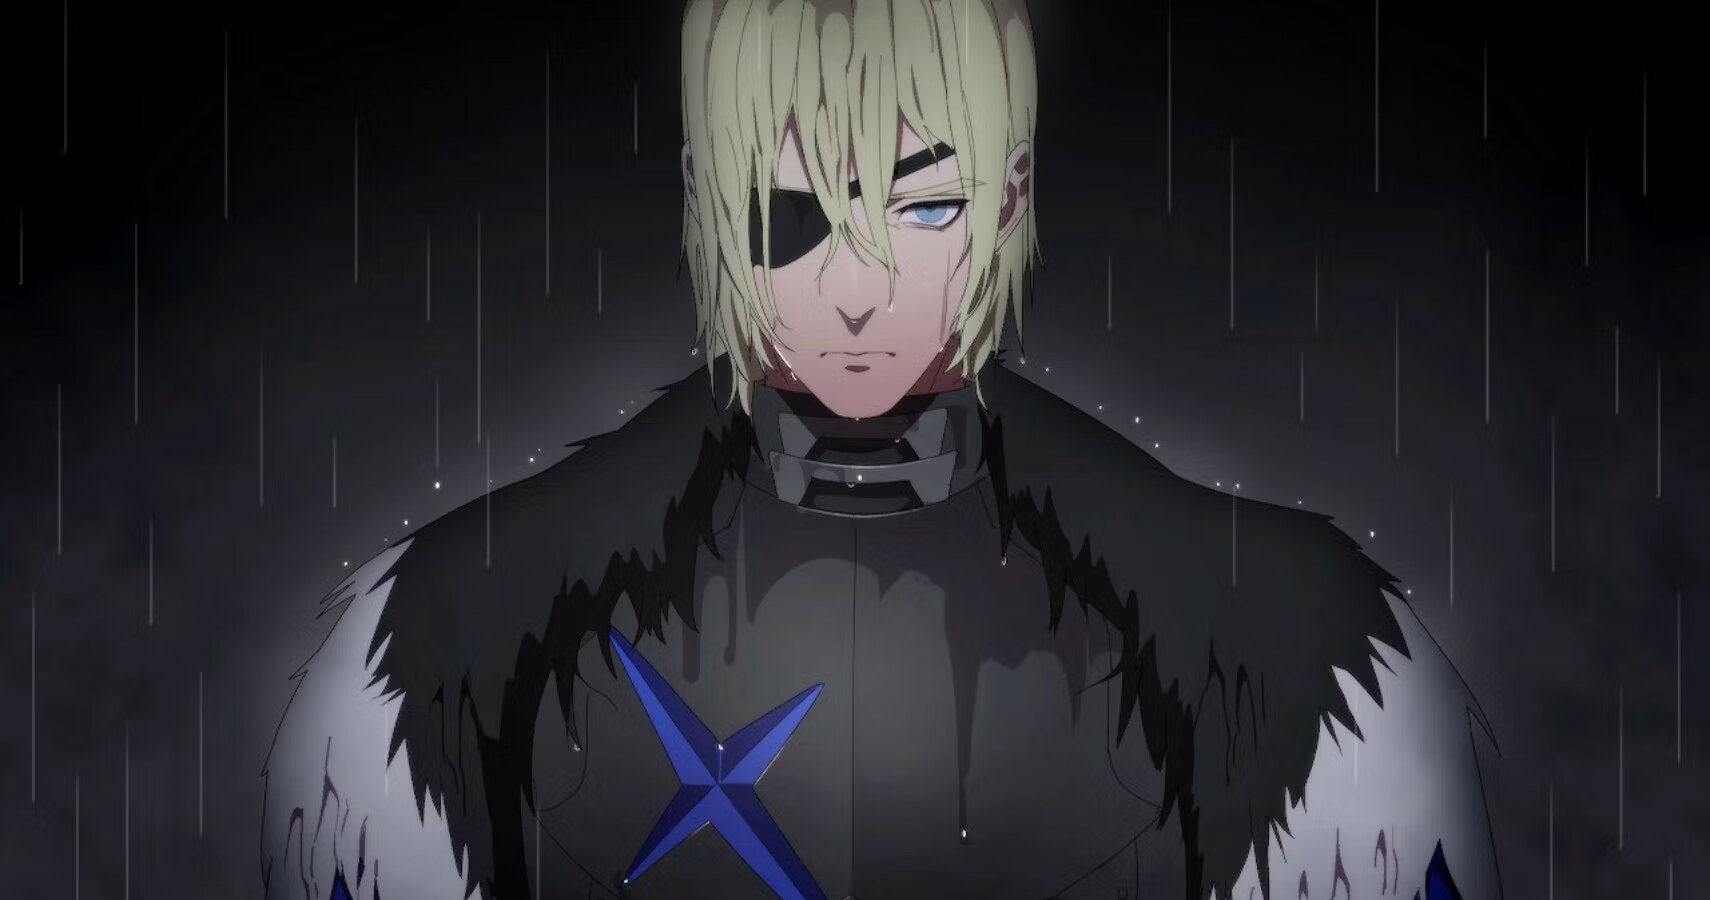 Dimitri frowning in the rain.